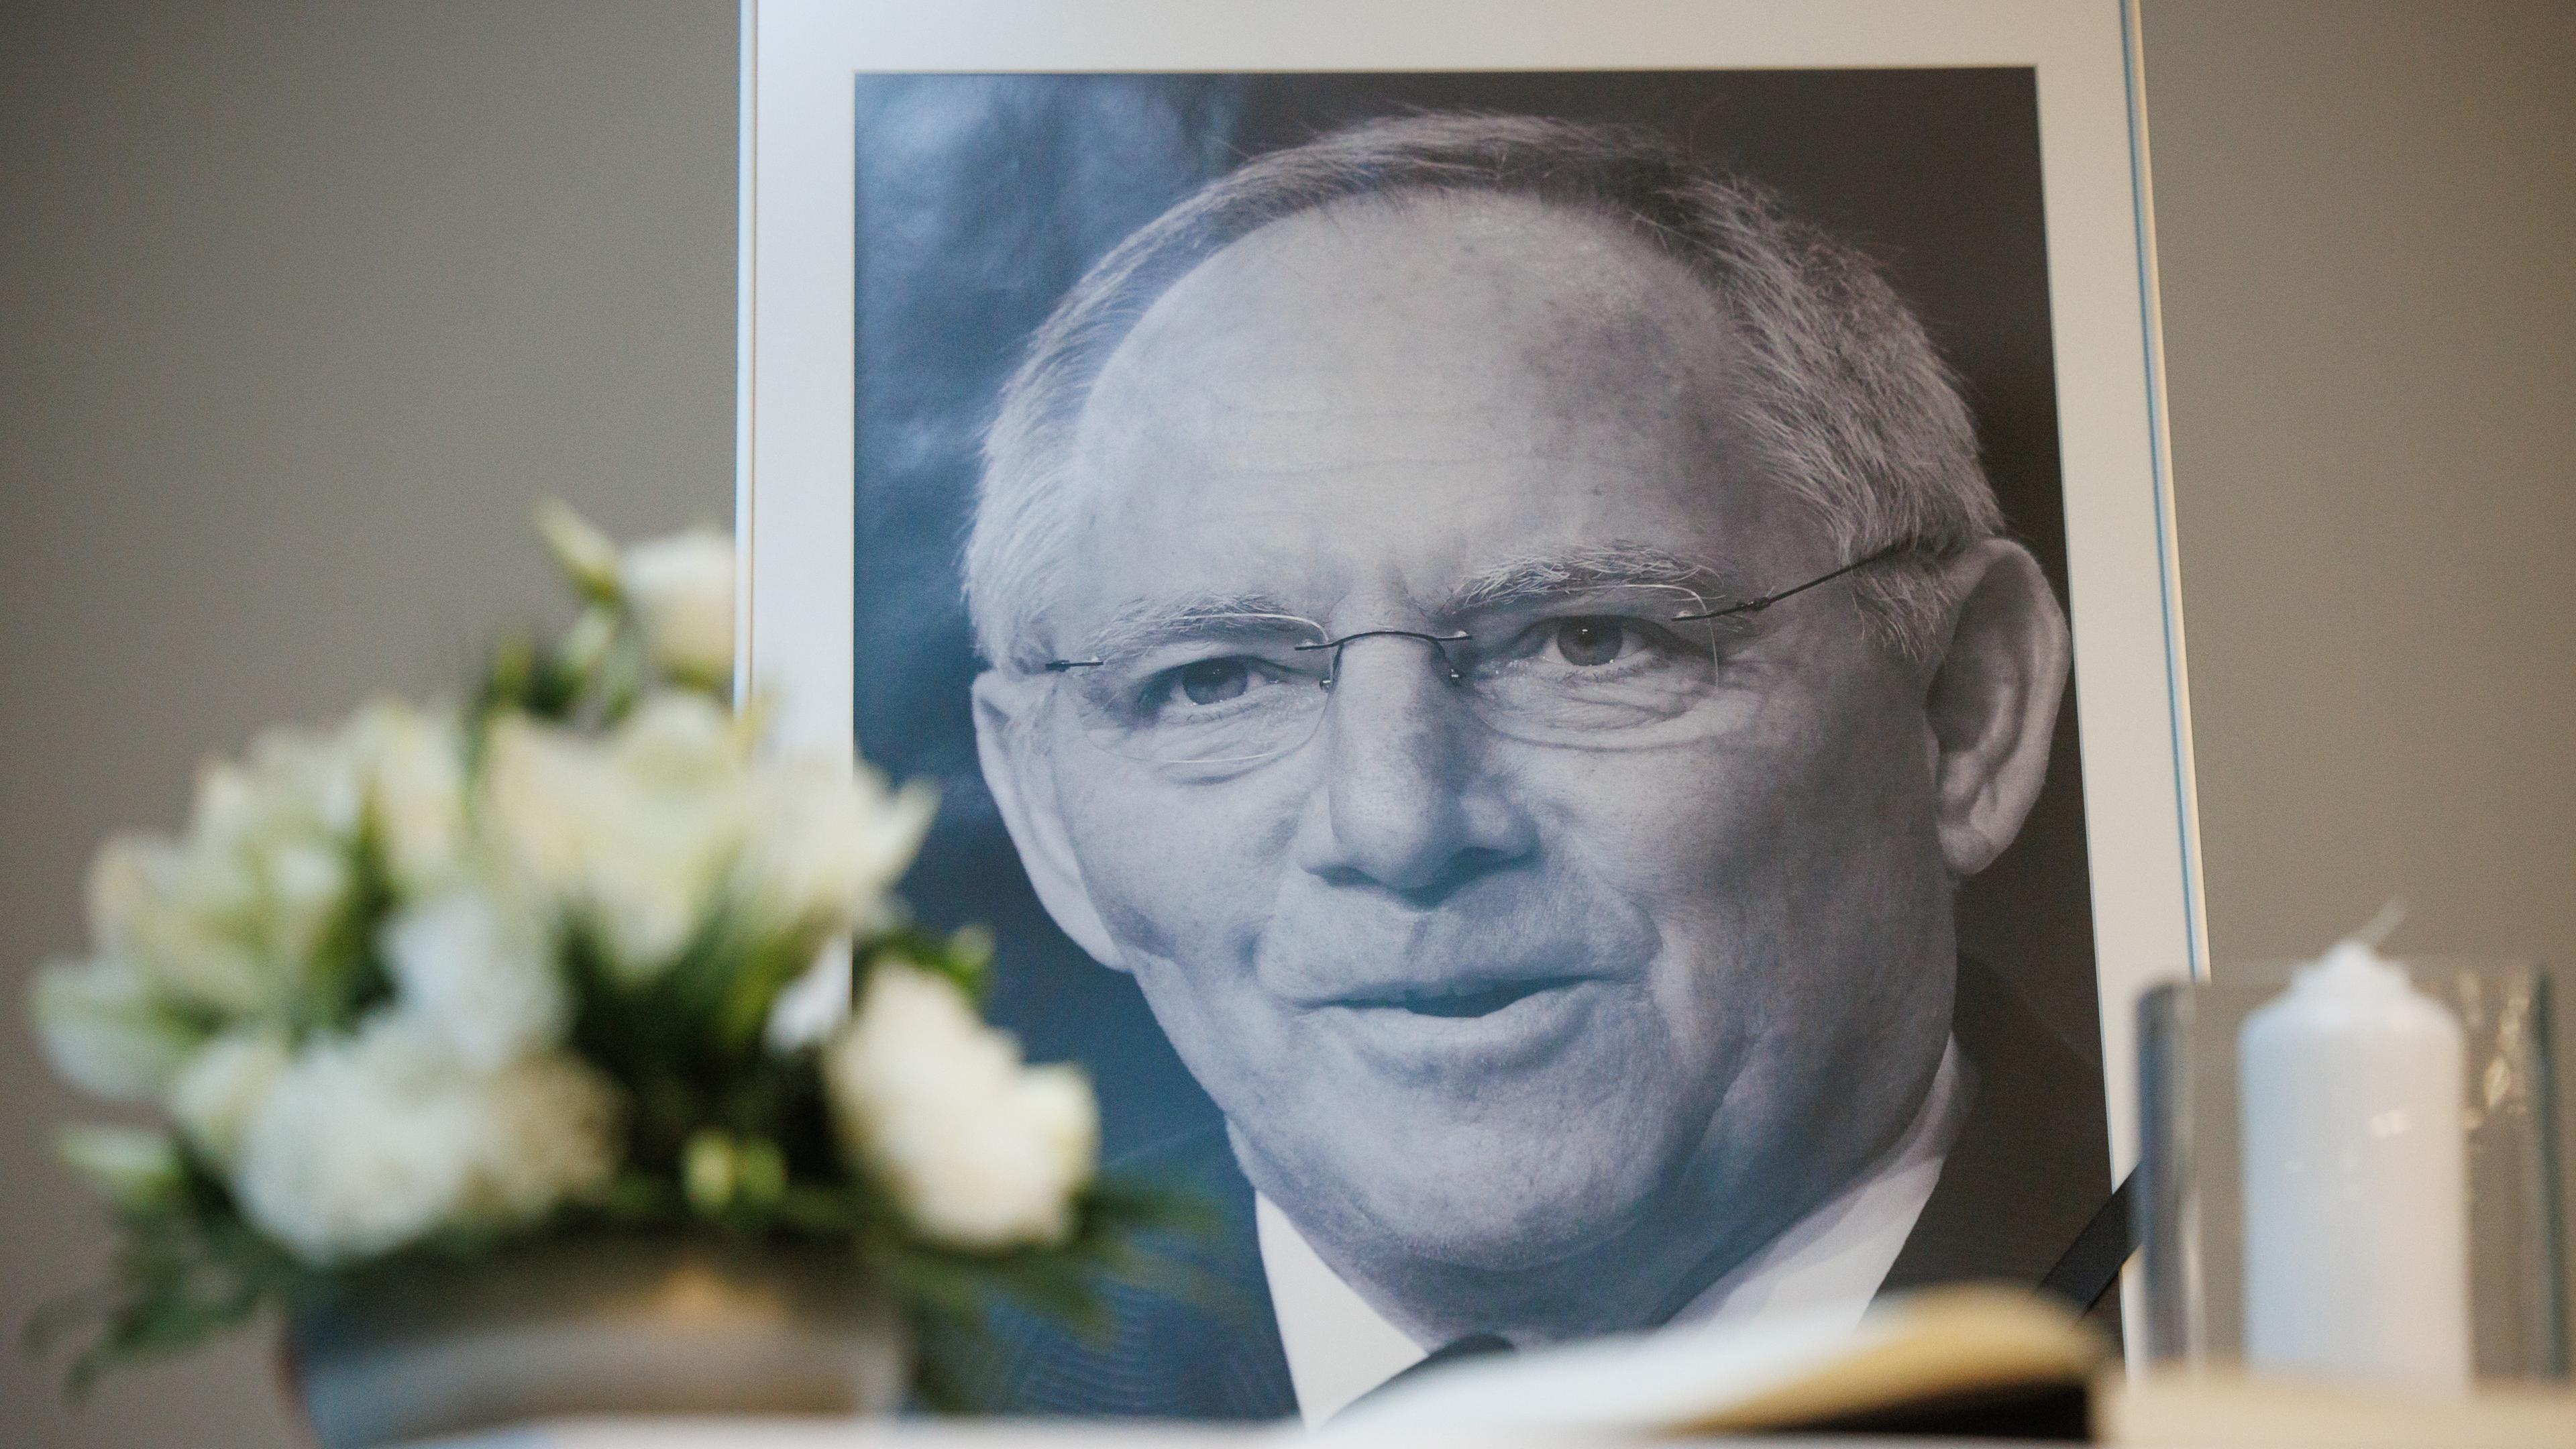 A condolence book and a portrait photo showing former German Parliament Bundestag president Wolfgang Schaeuble, next to a bouquet of flowers and a candle, are set up at the Konrad Adenauer Haus, the headquarters of the Christian Democratic Union (CDU) party, on the occasion of the announcement of Schaeuble's death in Berlin, Germany, 27 December 2023.